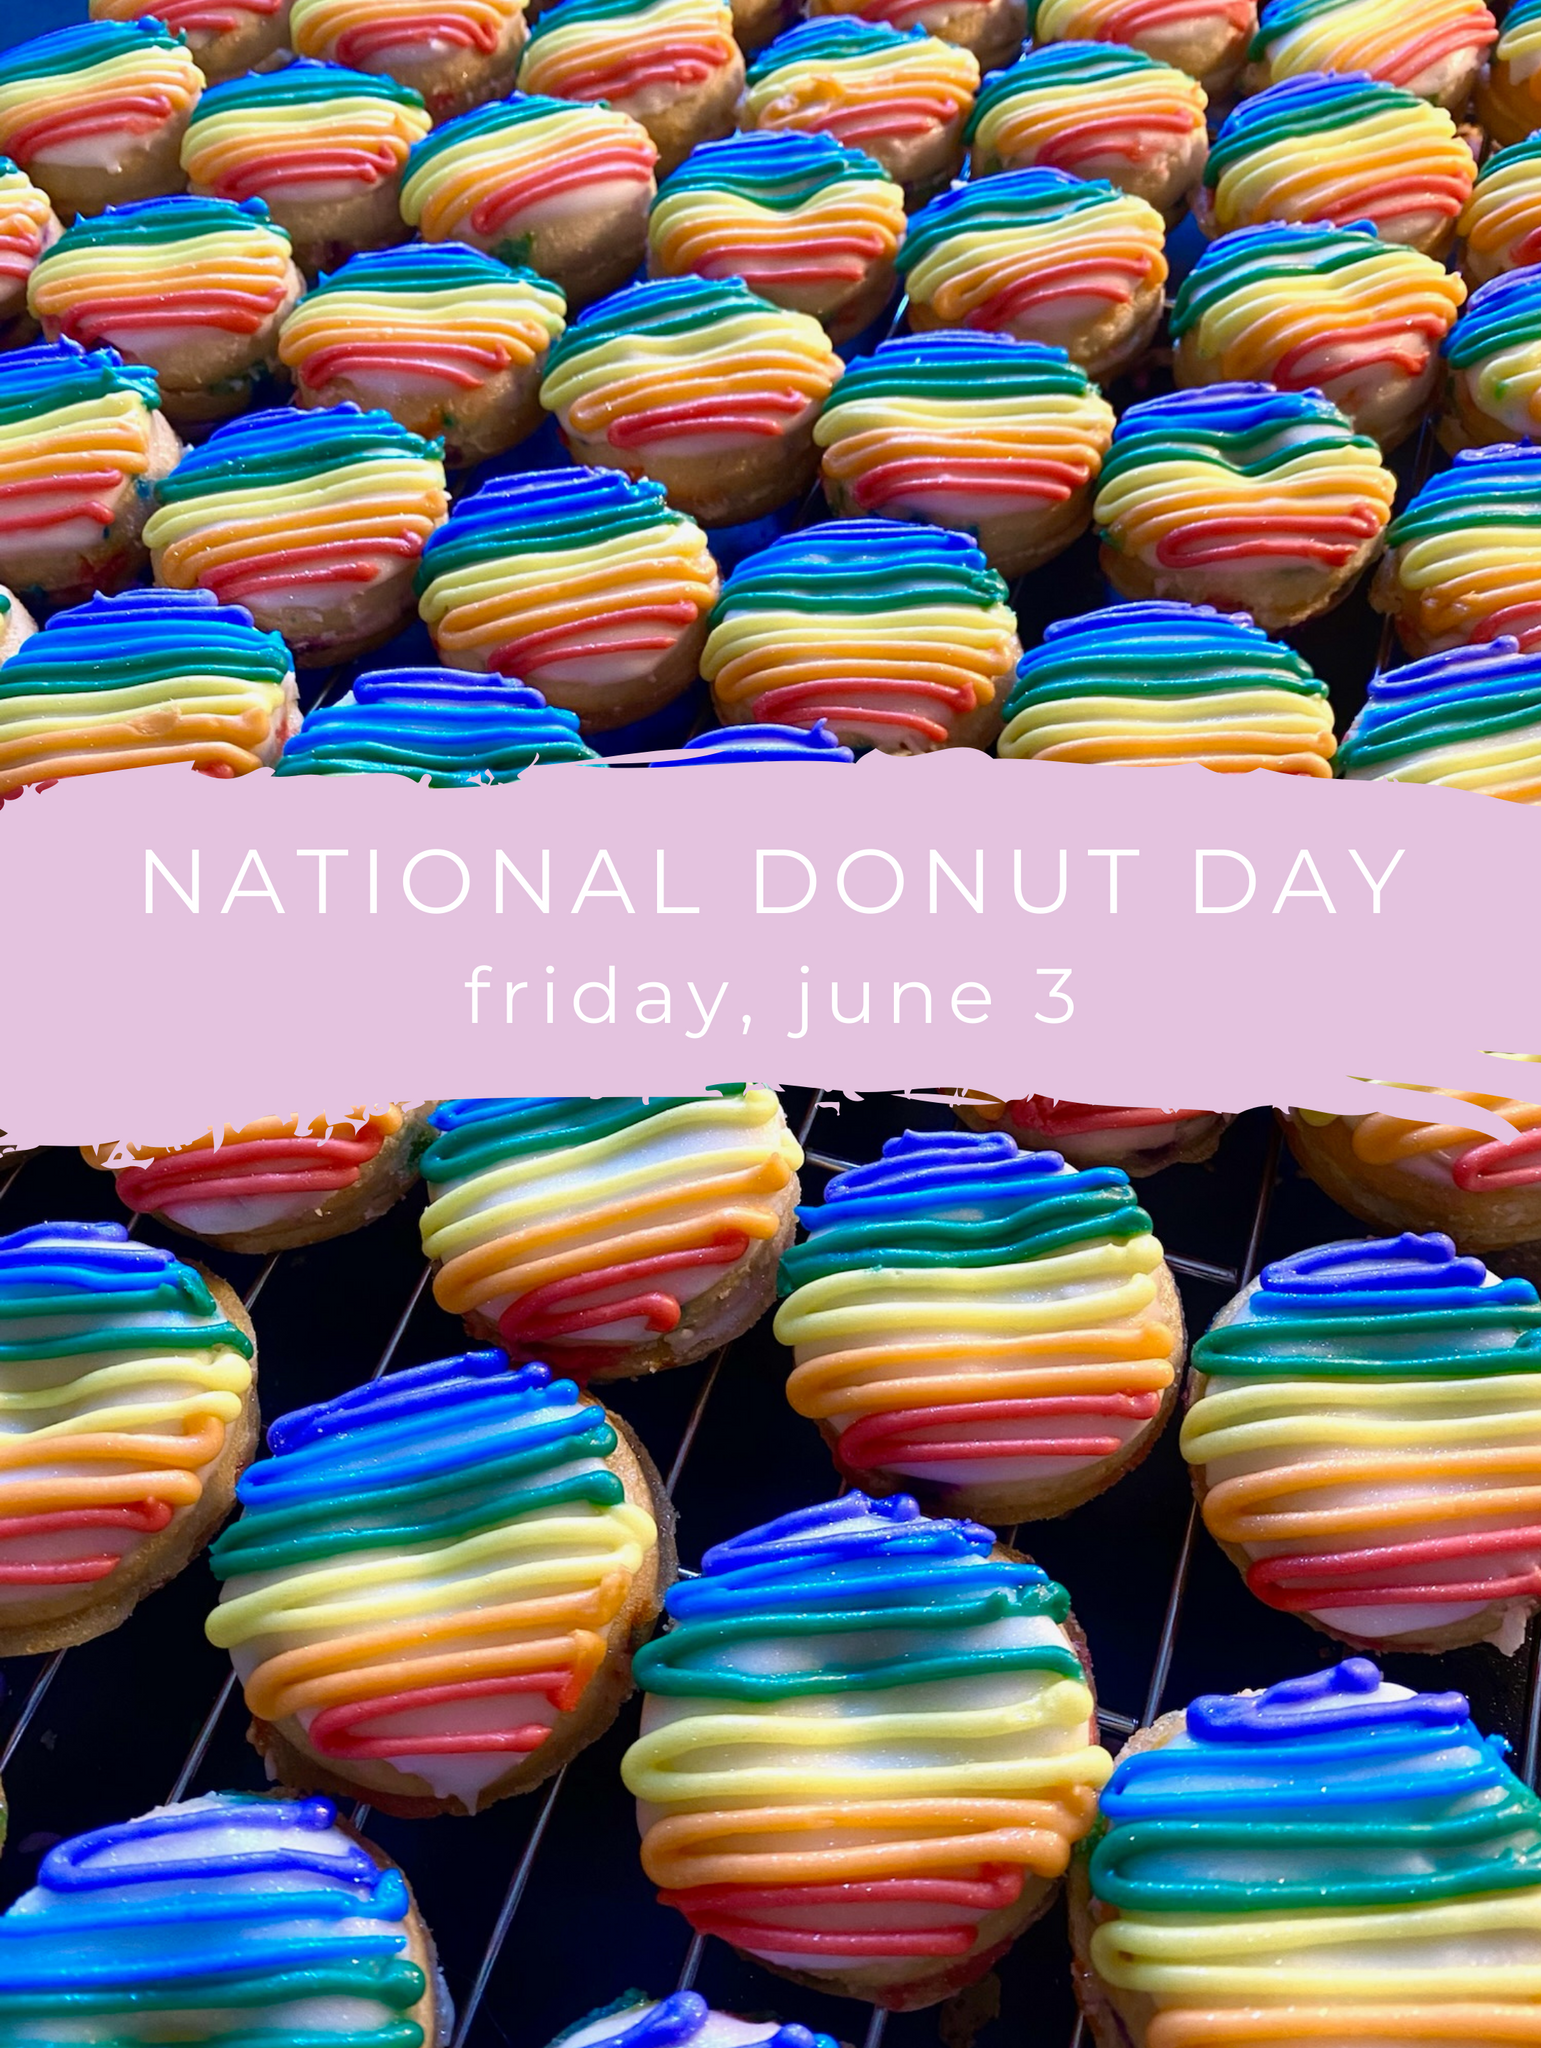 National Donut Day is June 3rd!